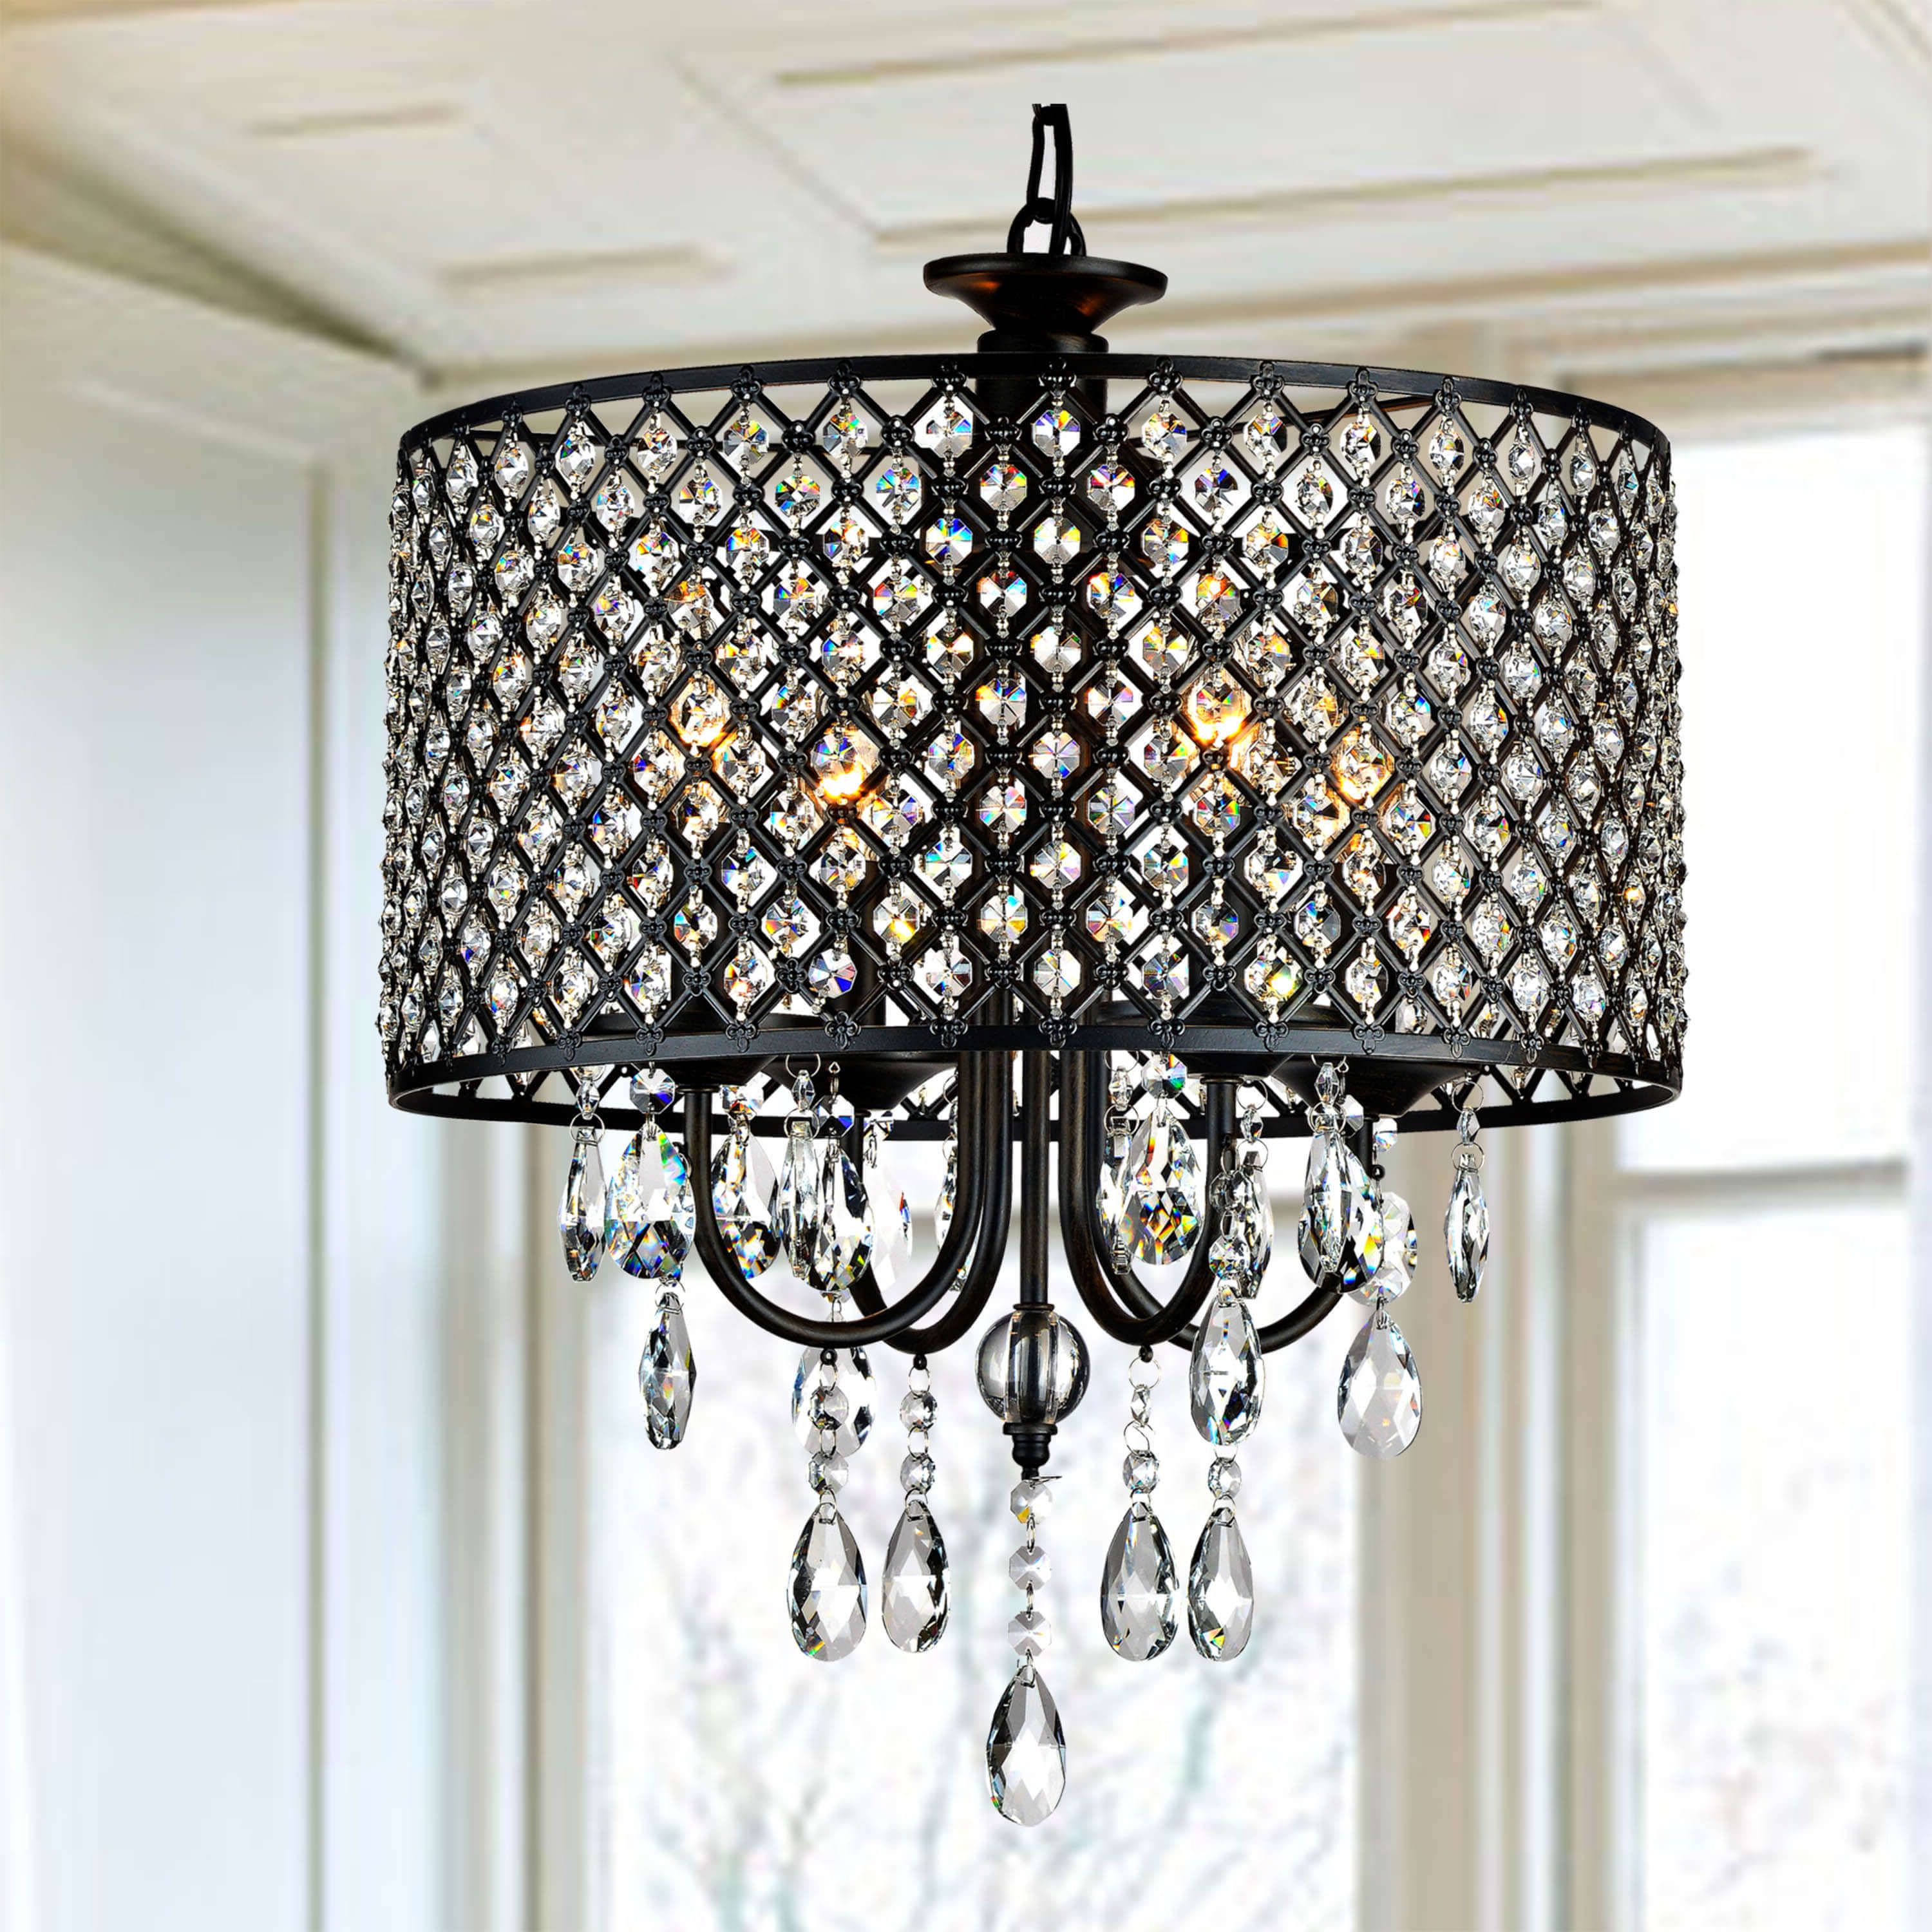 Silver Orchid Berger Antique Black 4 Light Round Crystal Chandelier For Favorite Emaria 4 Light Unique / Statement Chandeliers (View 13 of 25)